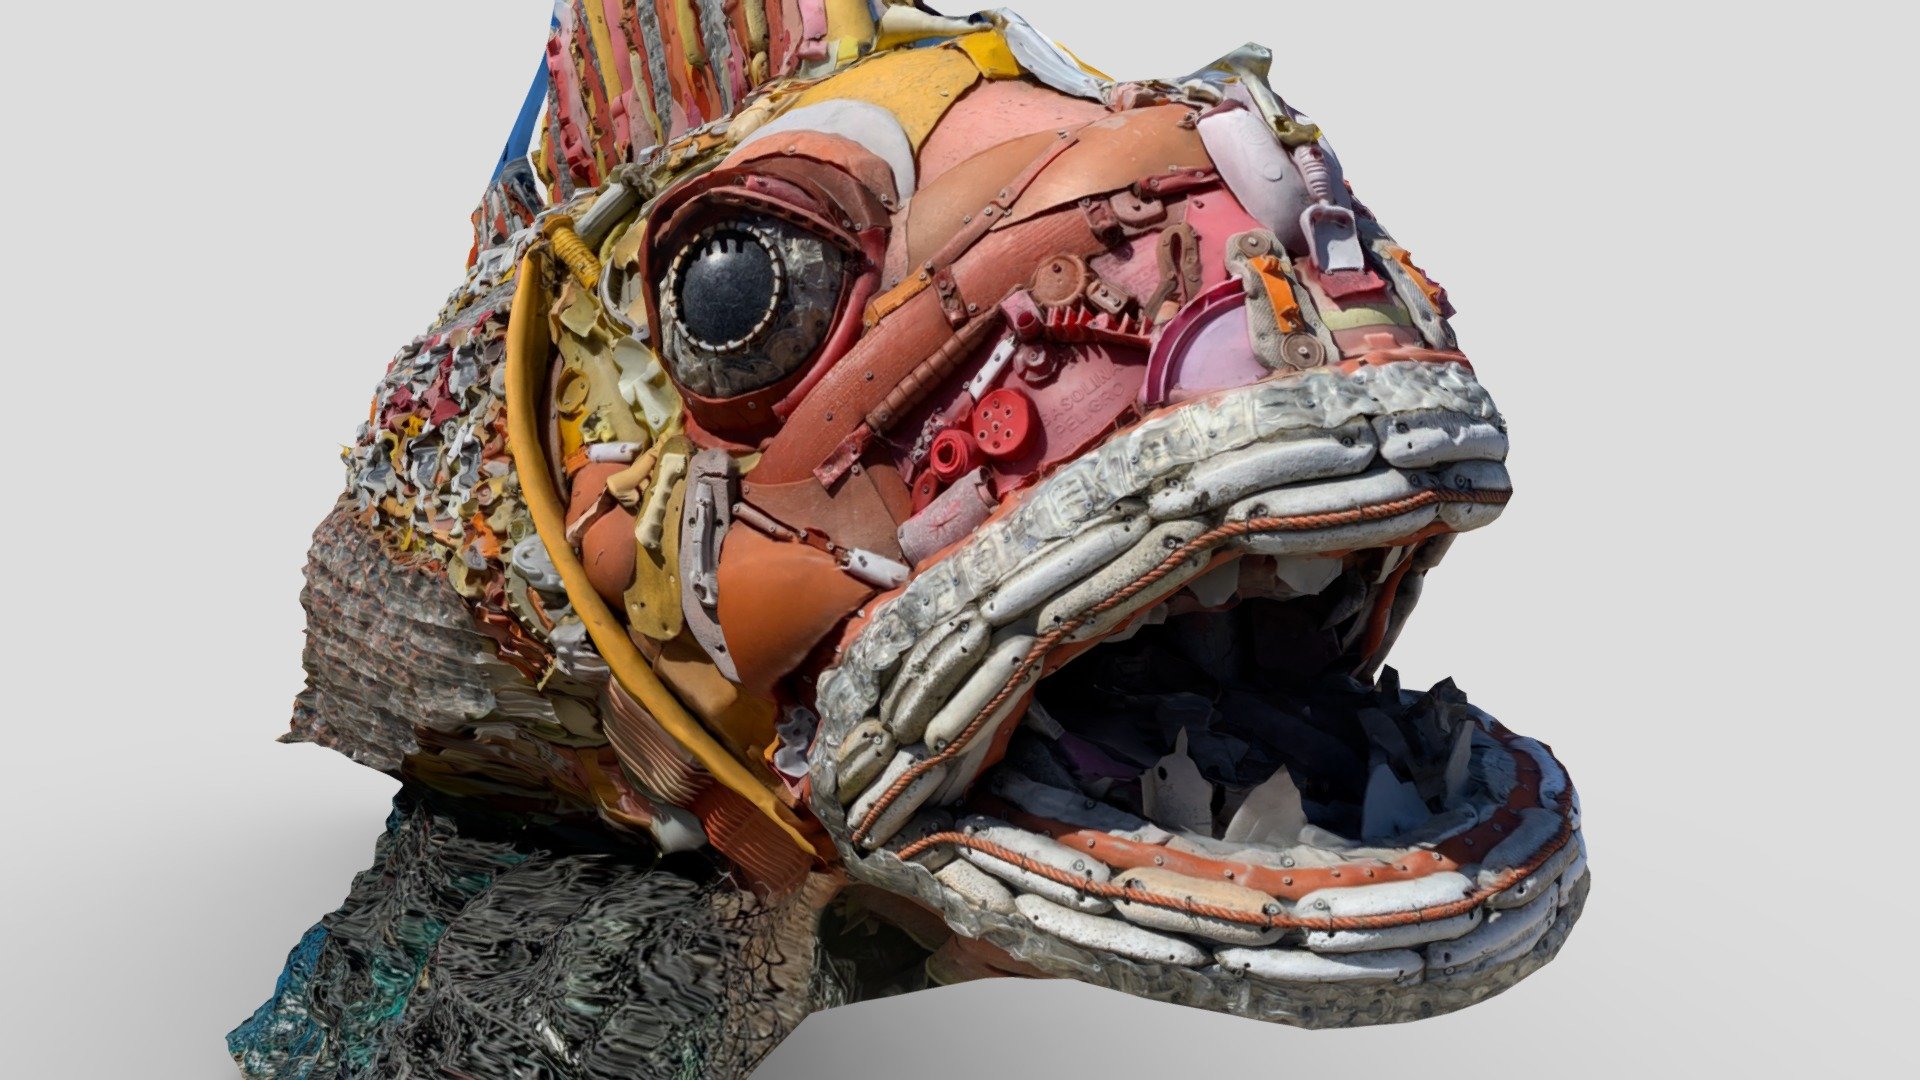 “Henry the Fish” is a sculpture created from ocean debris by the folks at Bandon, Oregon based Washed Ashore, which builds and exhibits aesthetically powerful art to educate a global audience about plastic pollution in oceans and waterways and spark positive changes in consumer habits.

The fish sculpture was modeled from iPhone photos using the Apple Object Capture API. The dataset was processed using full detail mode on a 2017 model MacBook Pro in less than 15 minutes 3d model